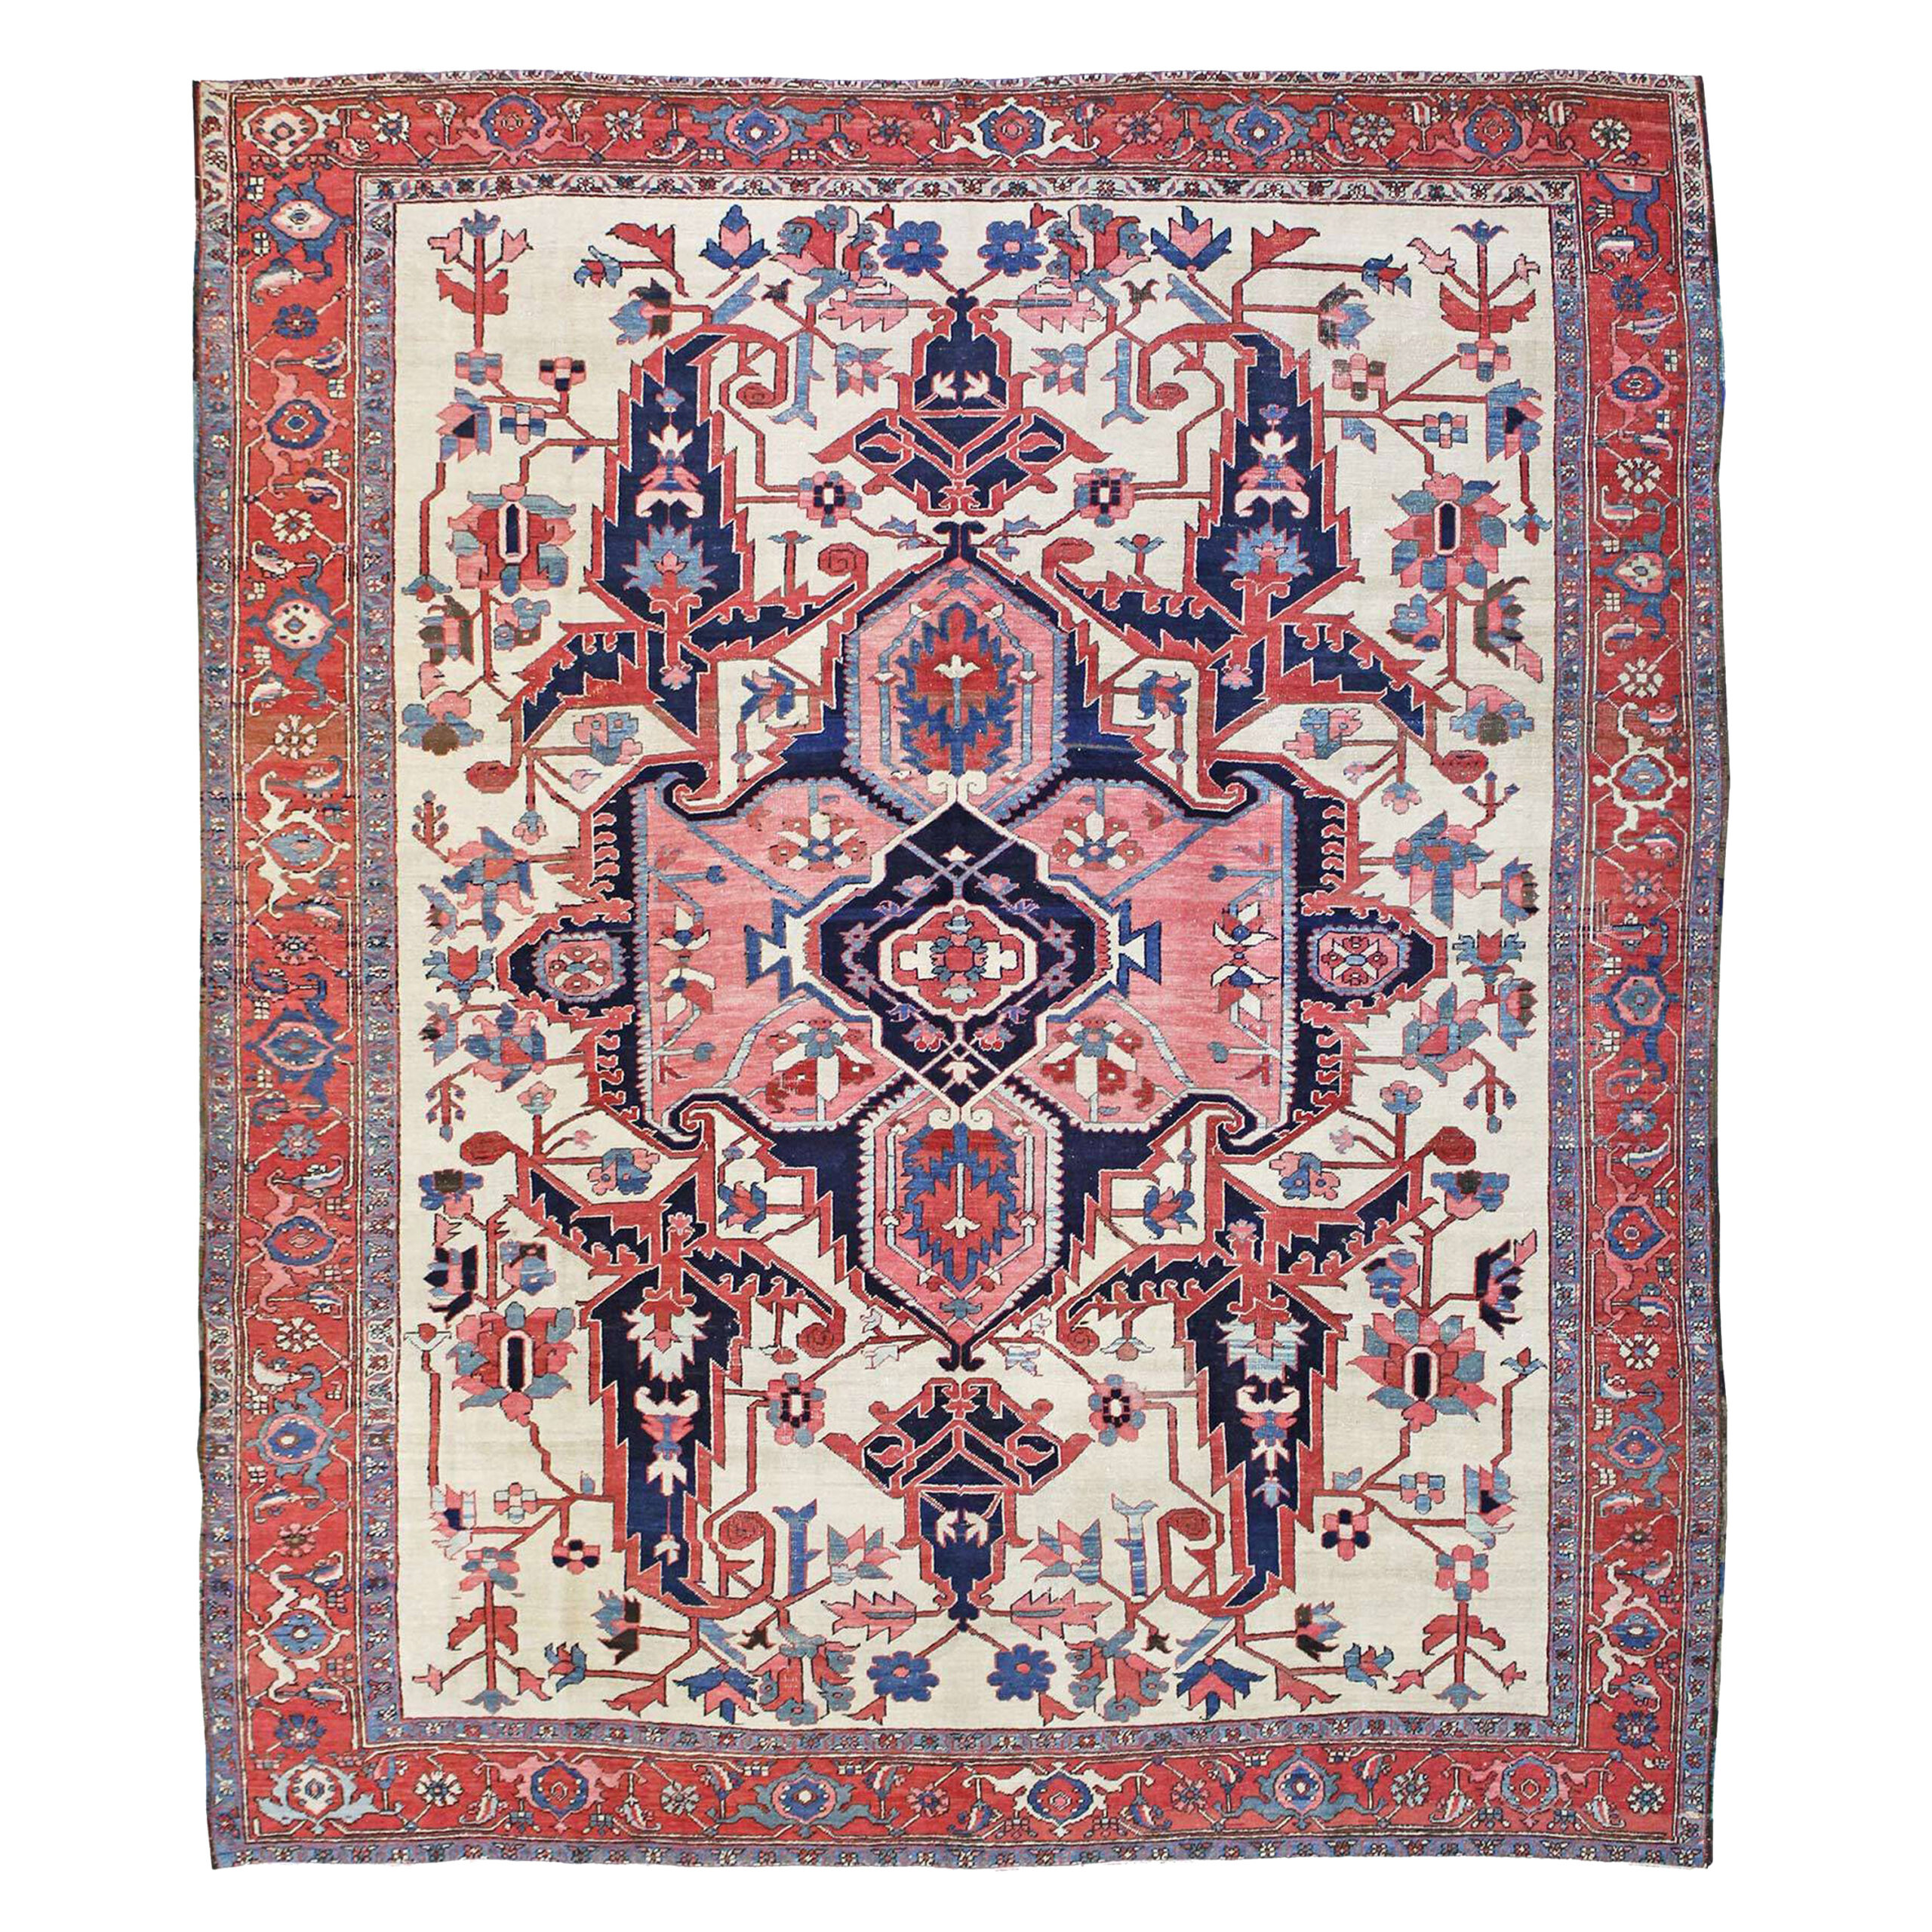 An antique Persian Heriz Serapi carpet with a coral and navy blue medallion on an ivory field that is also decorated with large, navy blue leaves and ancillary stylized floral decoration. A brick red Turtle design border frames the field. Douglas Stock Gallery, antique Persian carpets, Boston,MA area, antique carpets Brookline, Newton, Weston, Belmont, Wellesley, Needham, Natick,MA area